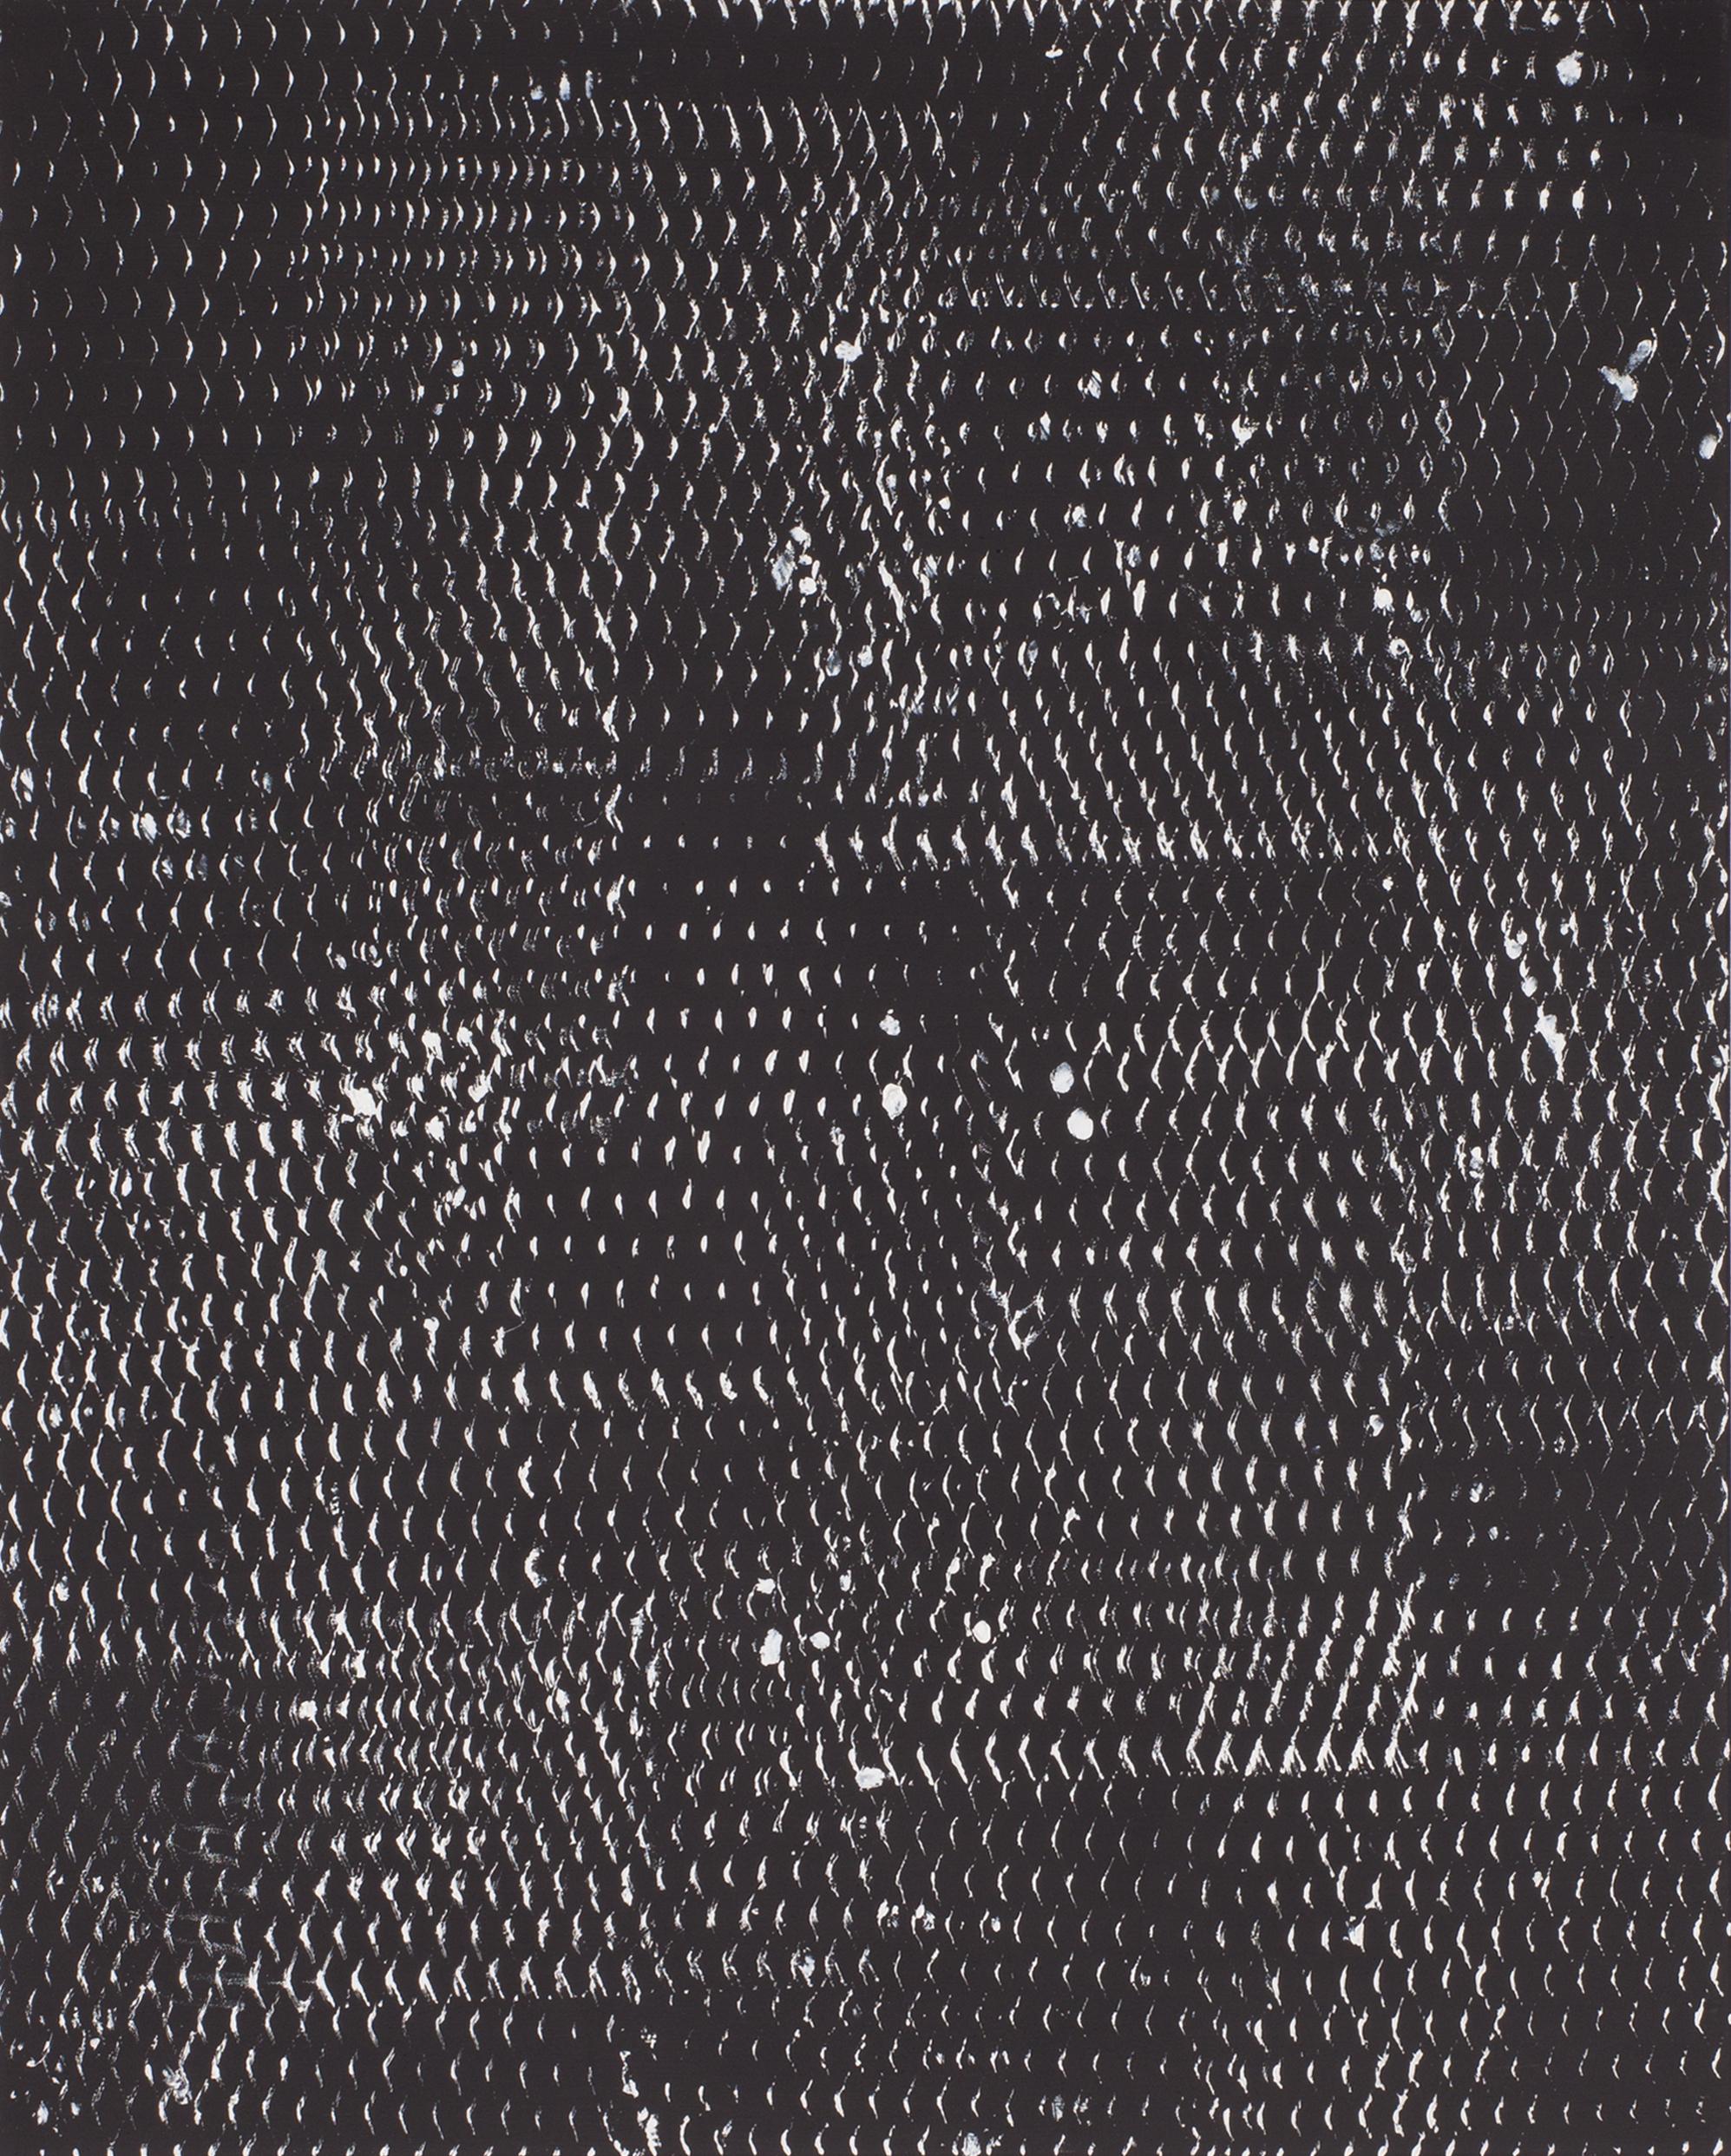 Black and White III, Expanded Metal Painting